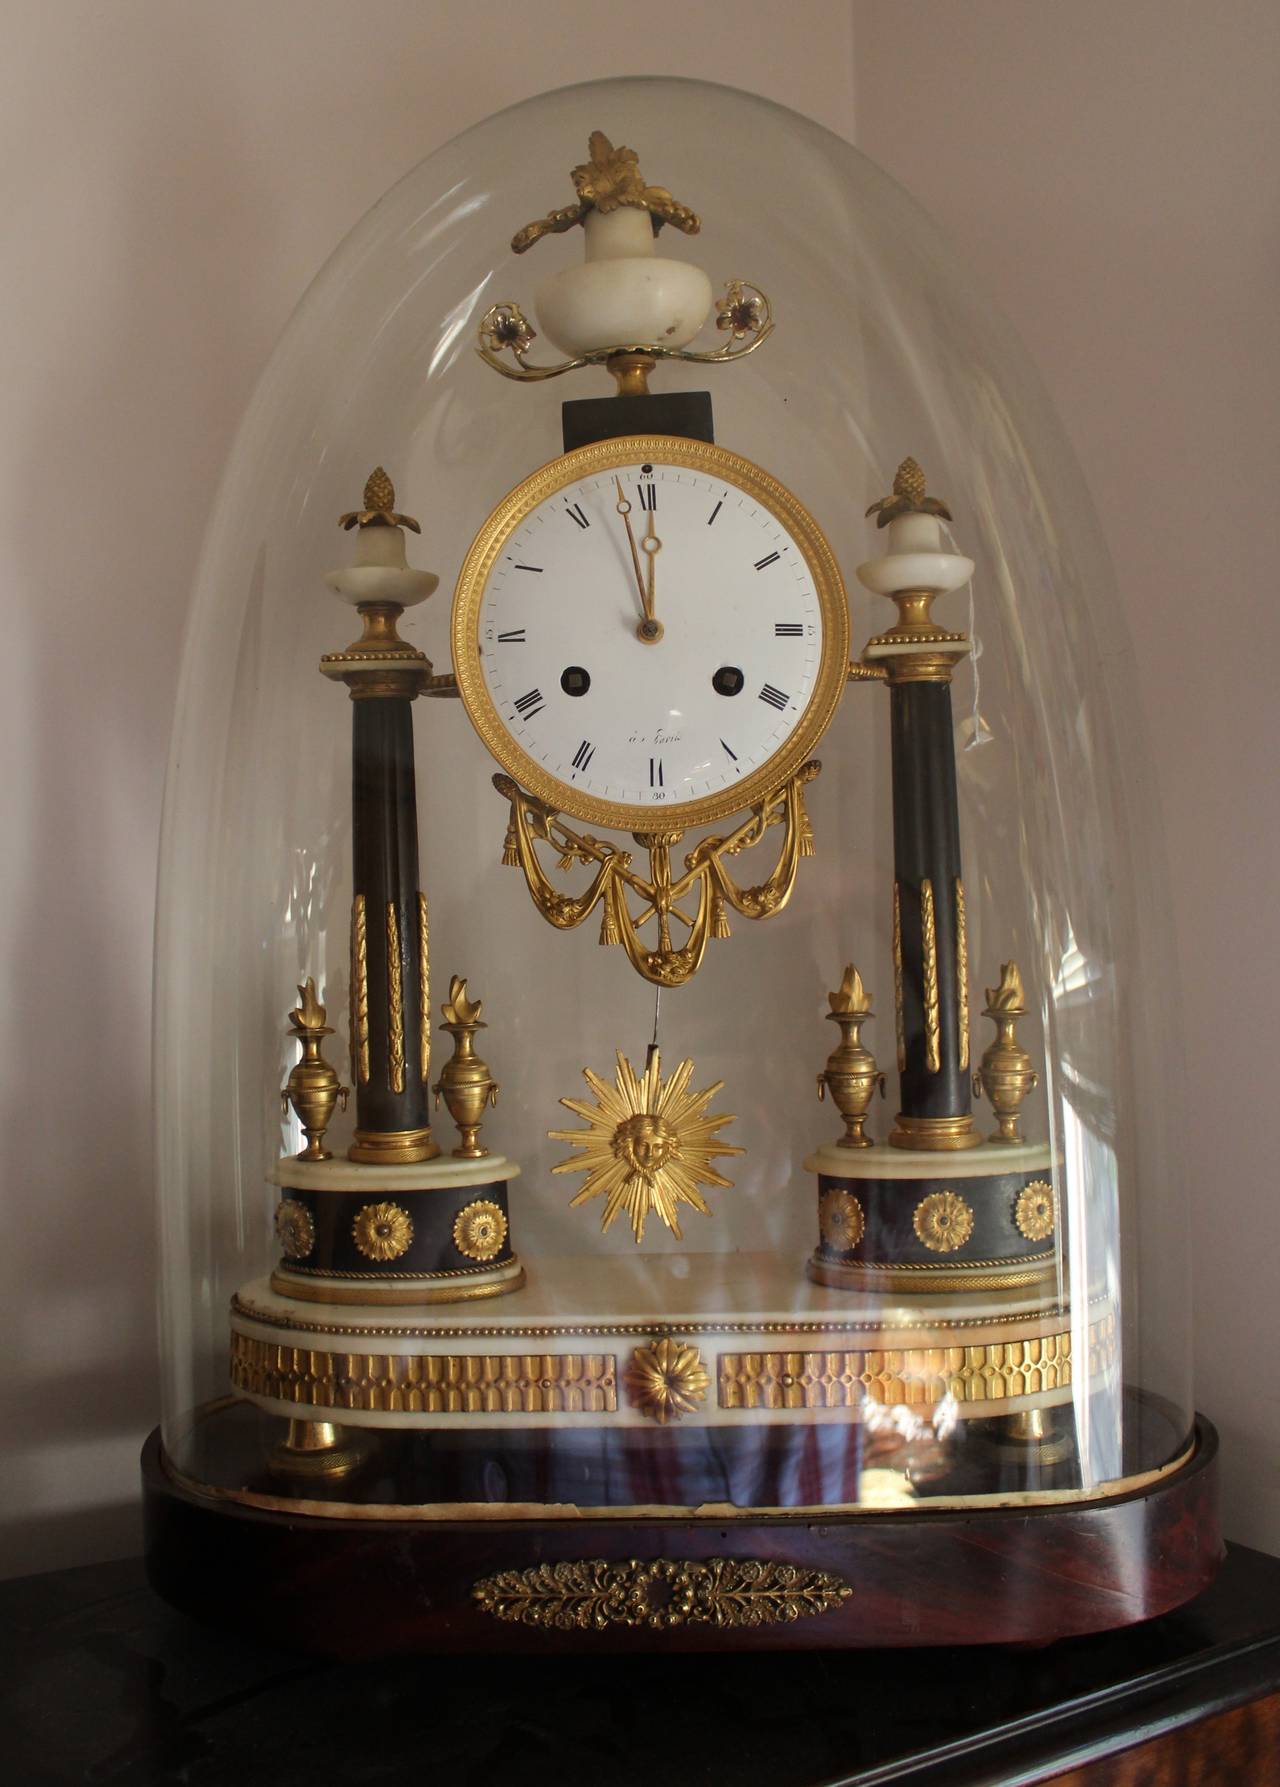 Early 19th century French Empire period marble and ormolu clock.

French Carrara marble Portico clock with extensive ormolu fretwork mounted on two finely decorated marble columns topped with three ornate ormolu finials shaped as pineapple topped